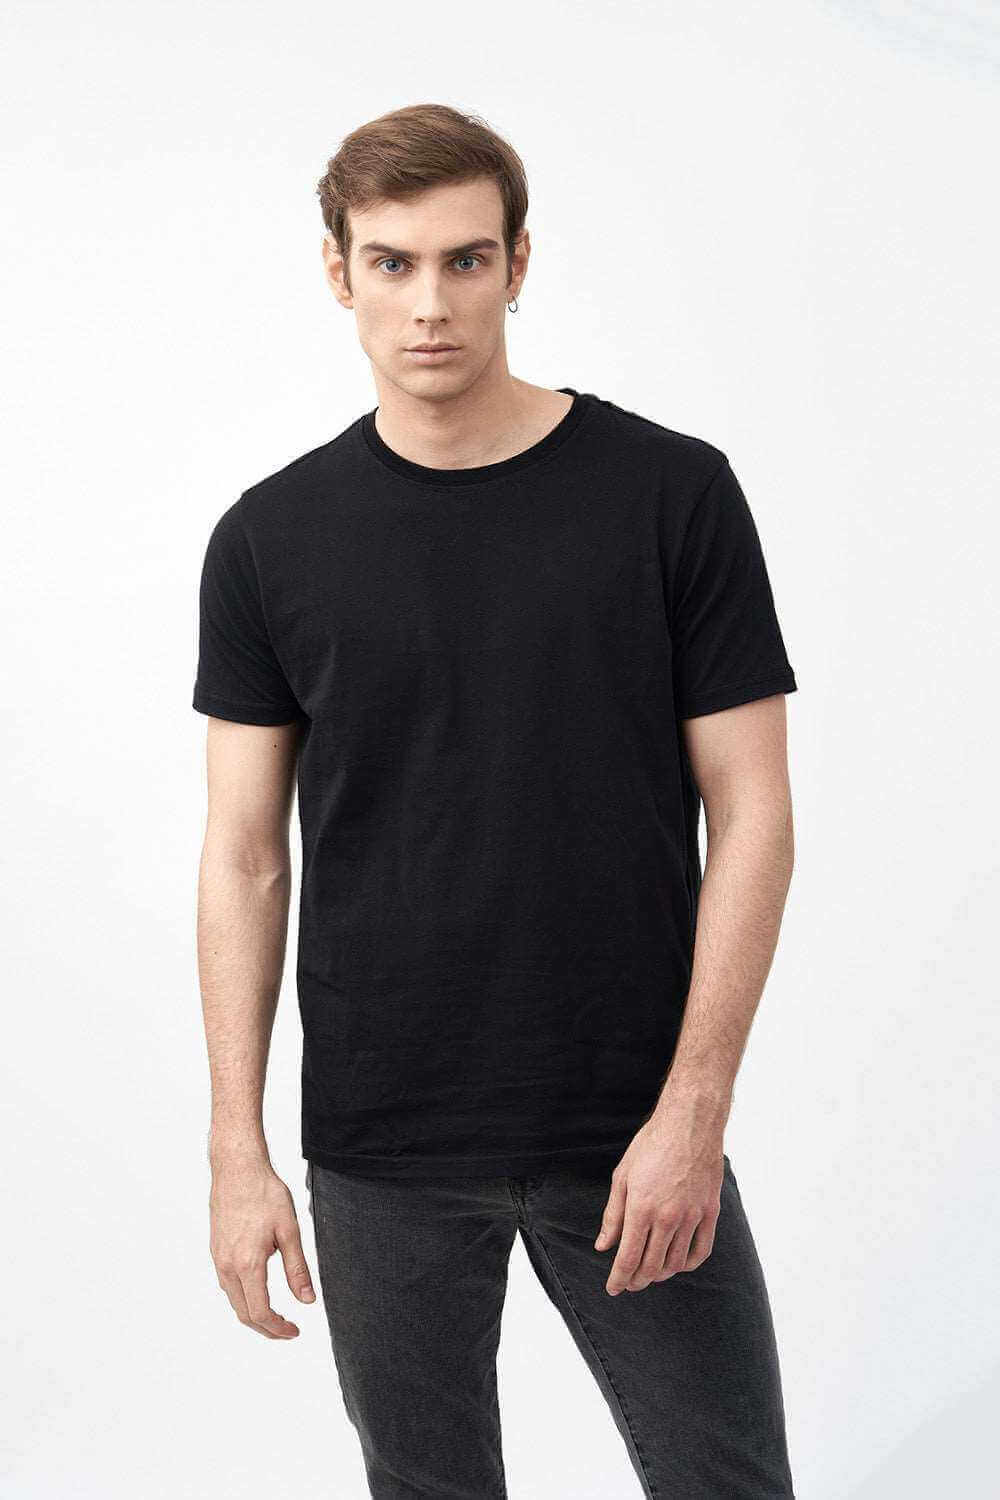 Front View of Crew Neck Men's Short Sleeve Shirts in Black